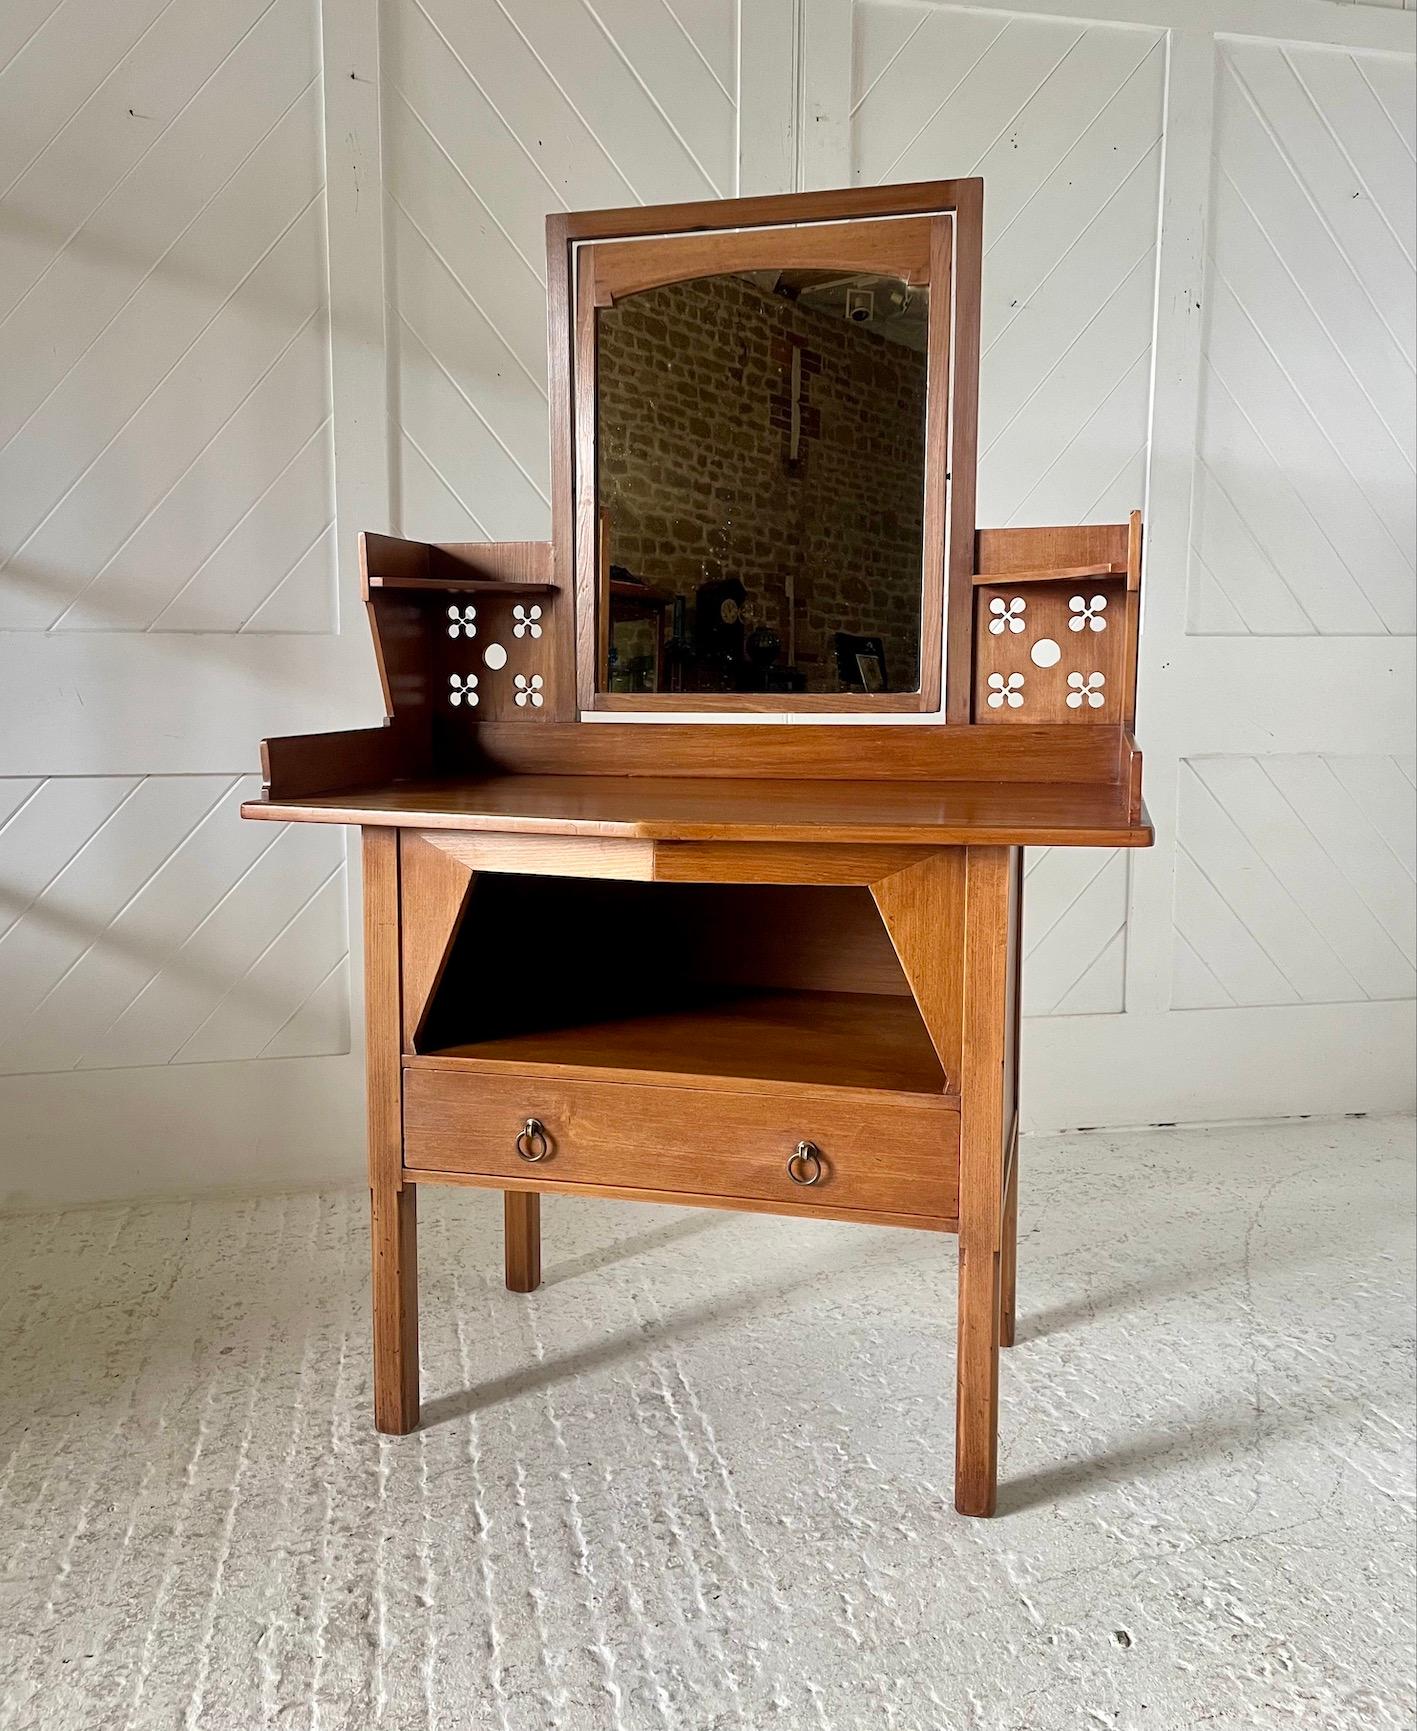 We have for offer a wonderful Arts & Crafts dressing table
It is in Sycamore
There is a central tilting mirror with pierced decoration to either side
A pull out bottom drawer with brass ring handles
Enamel early Liberty & Co label to the reverse
In